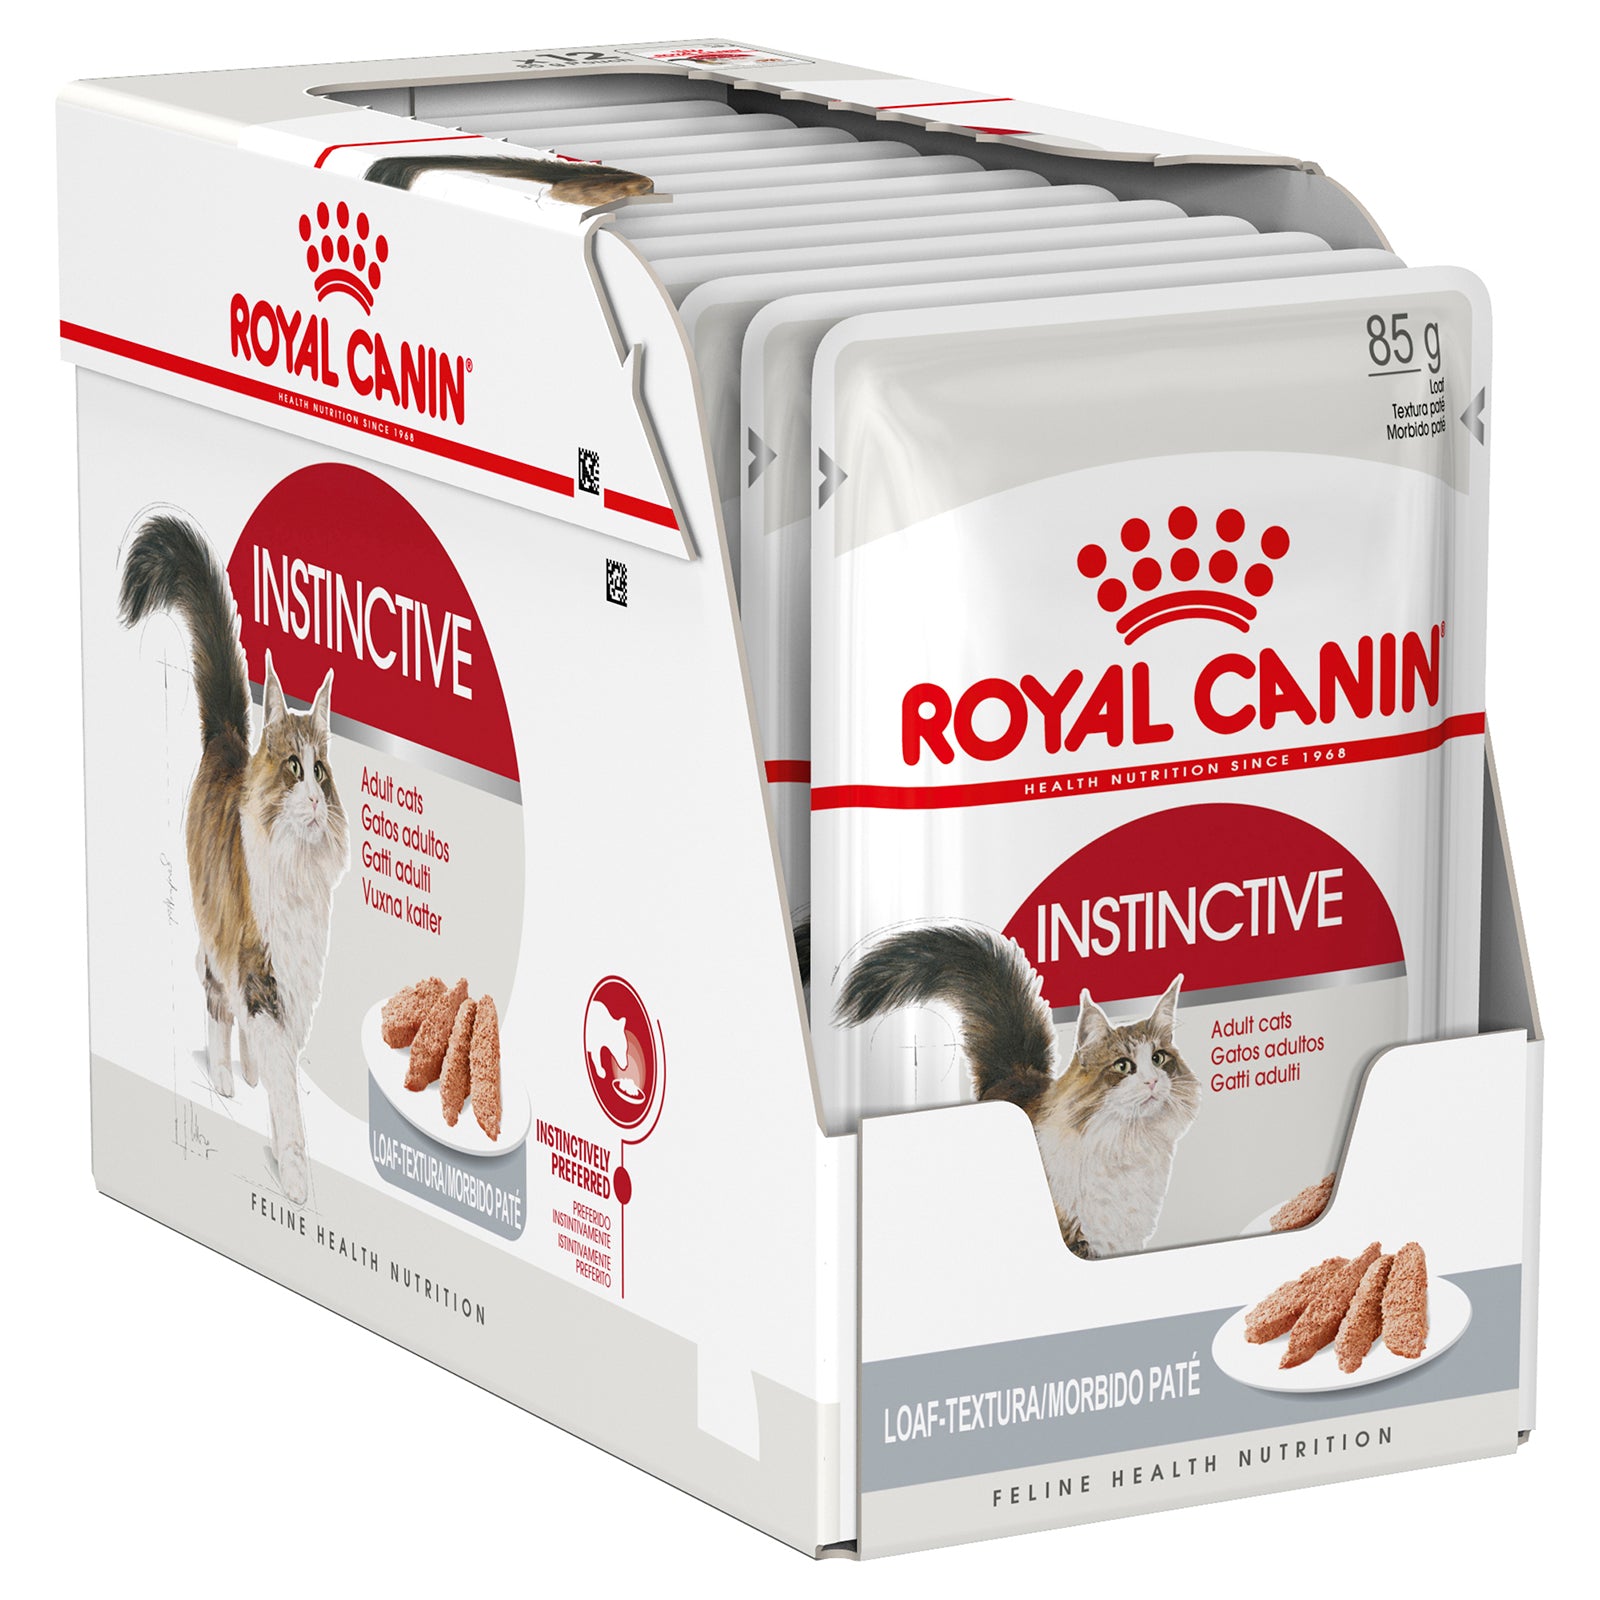 Royal Canin Cat Food Pouch Adult Instinctive Loaf